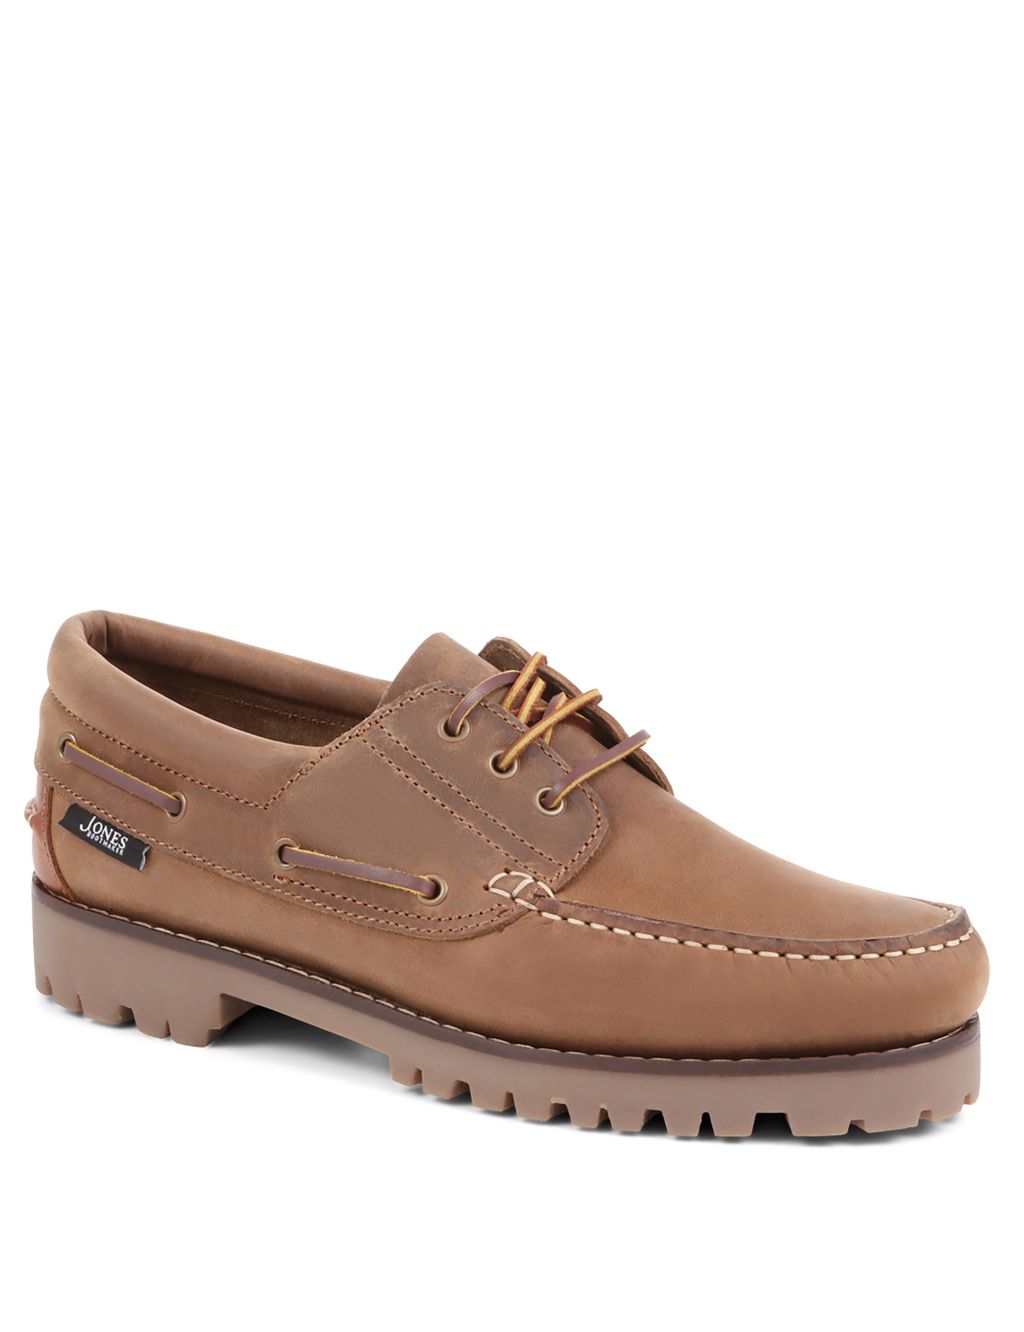 Leather Boat Shoes image 3